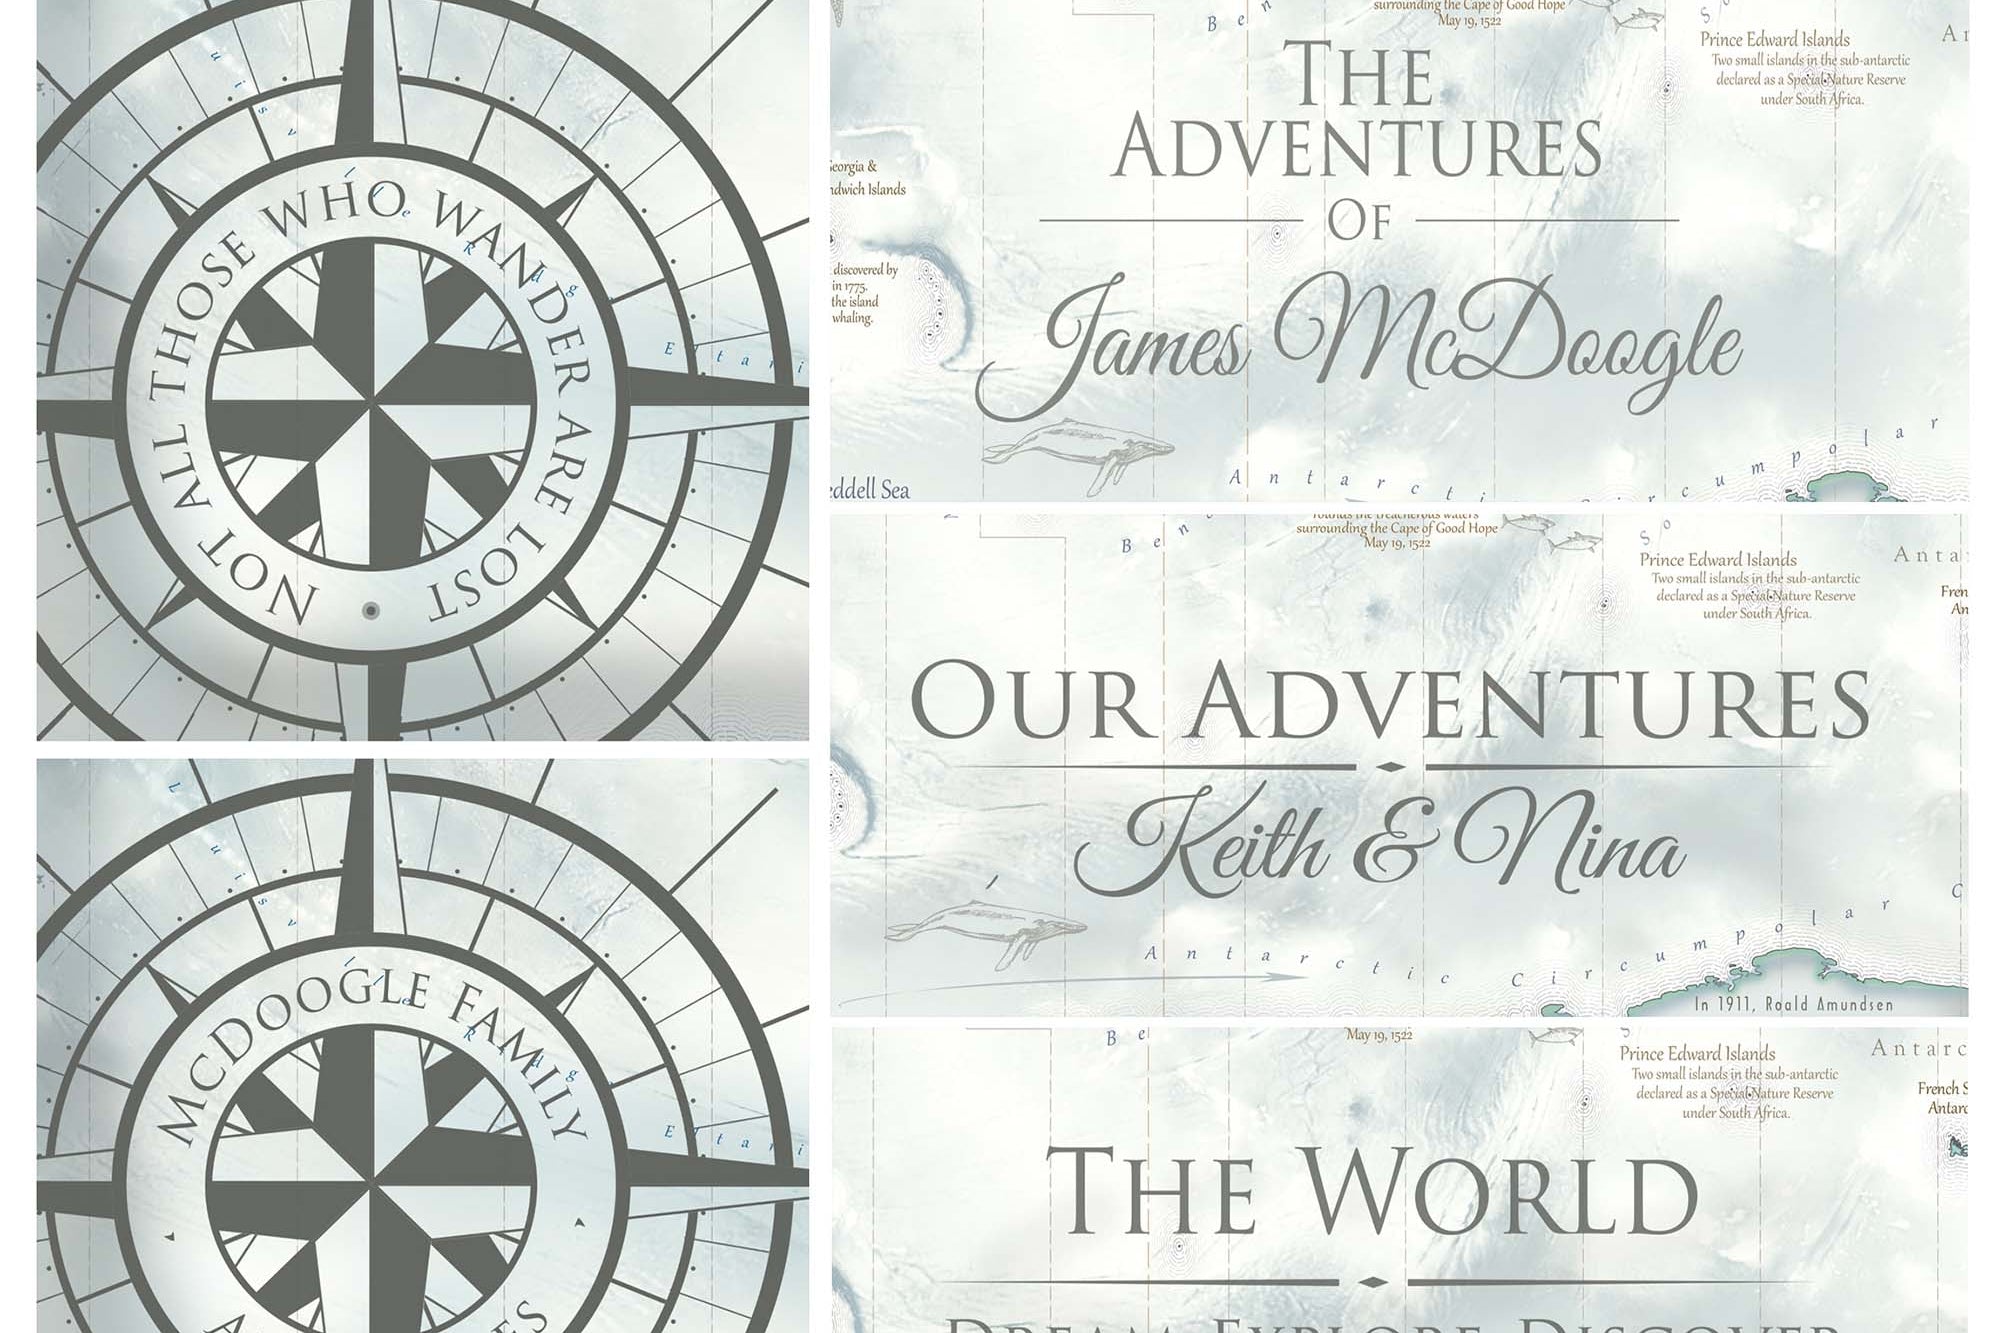 personalized world map custom options - compass, legend, titles. Include your family names or logo